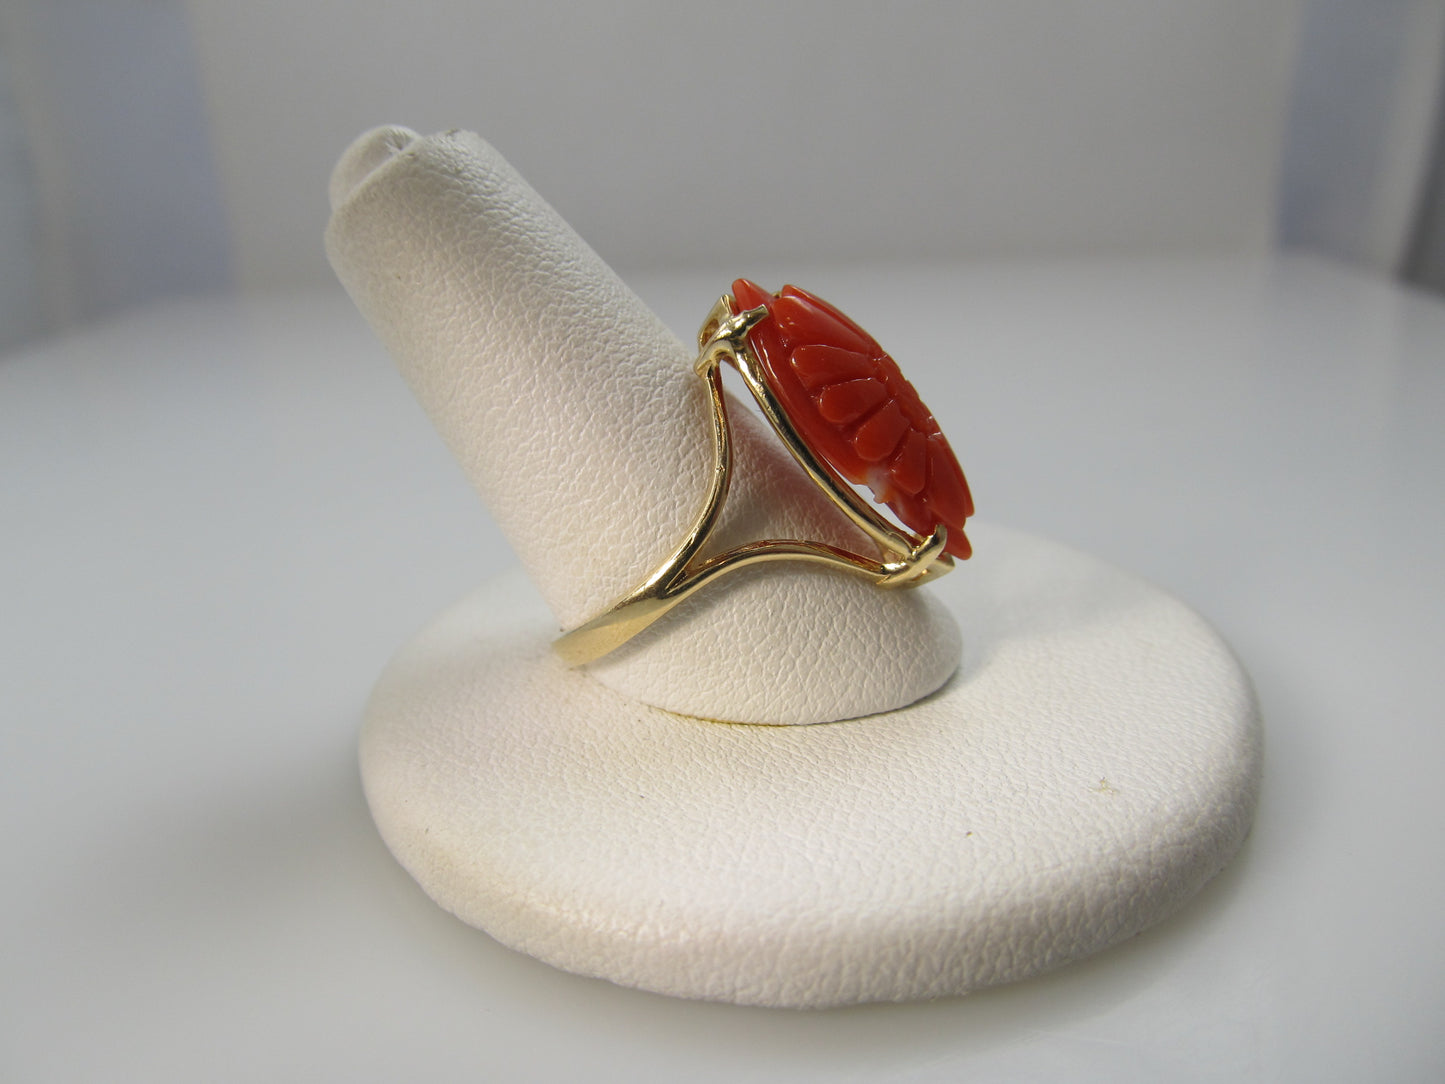 Estate carved coral flower ring, 14k yellow gold